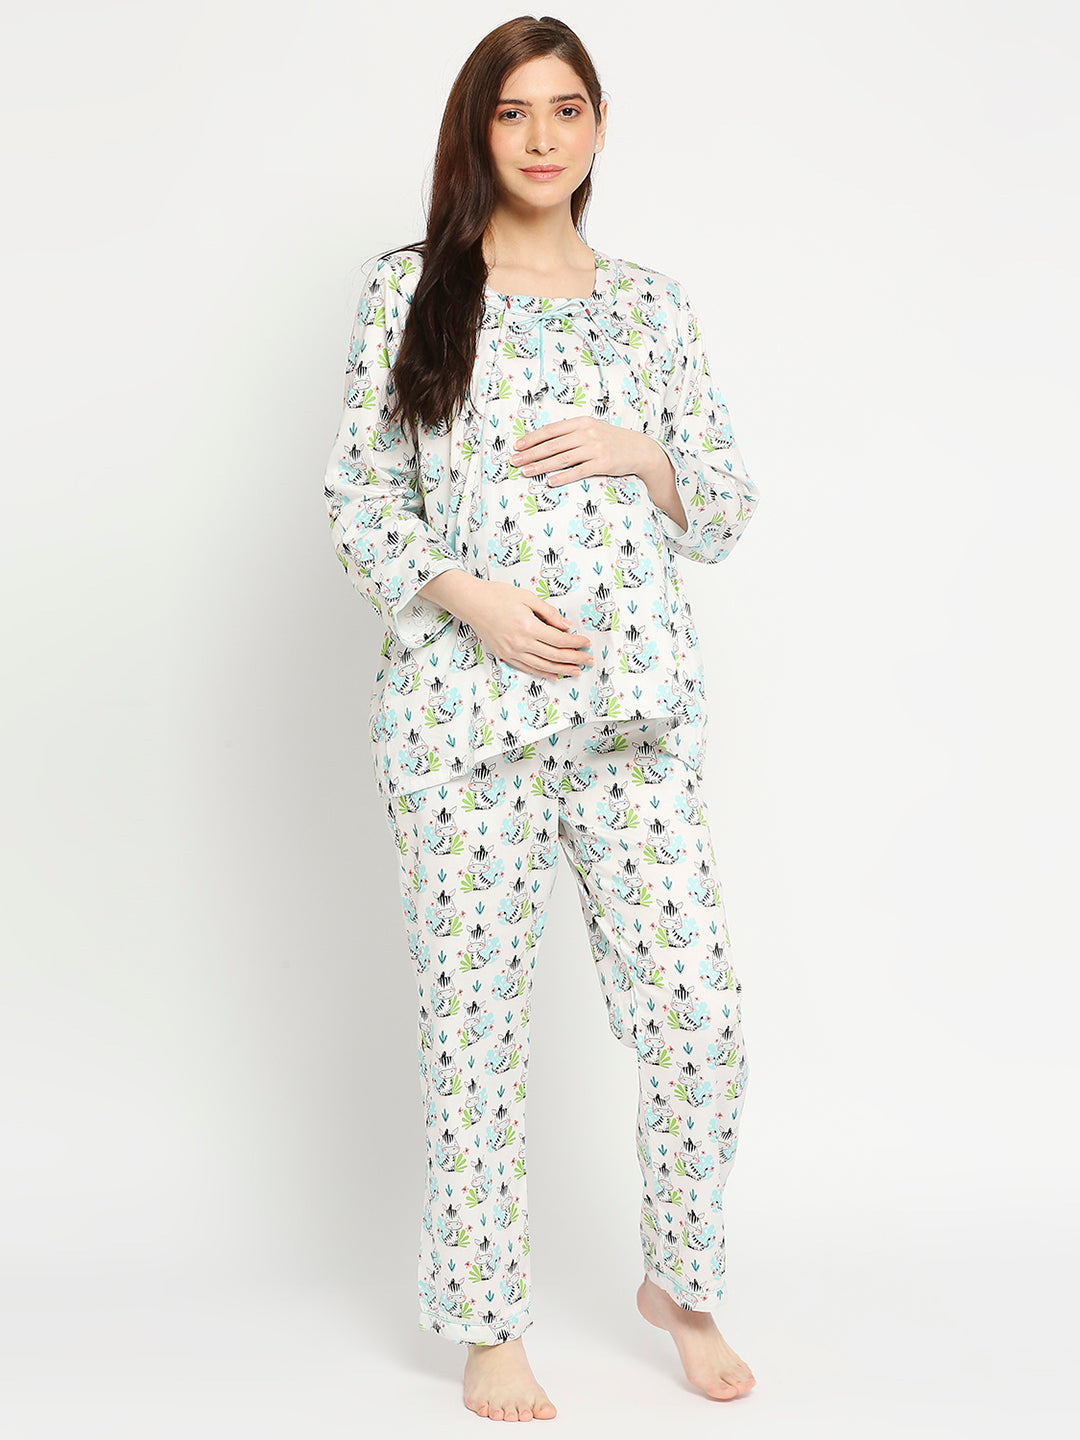 Baby Zee Maternity Pj Set - Pure Cotton Pj Set in Round Neck with 2 Invisible Zips for Feeding